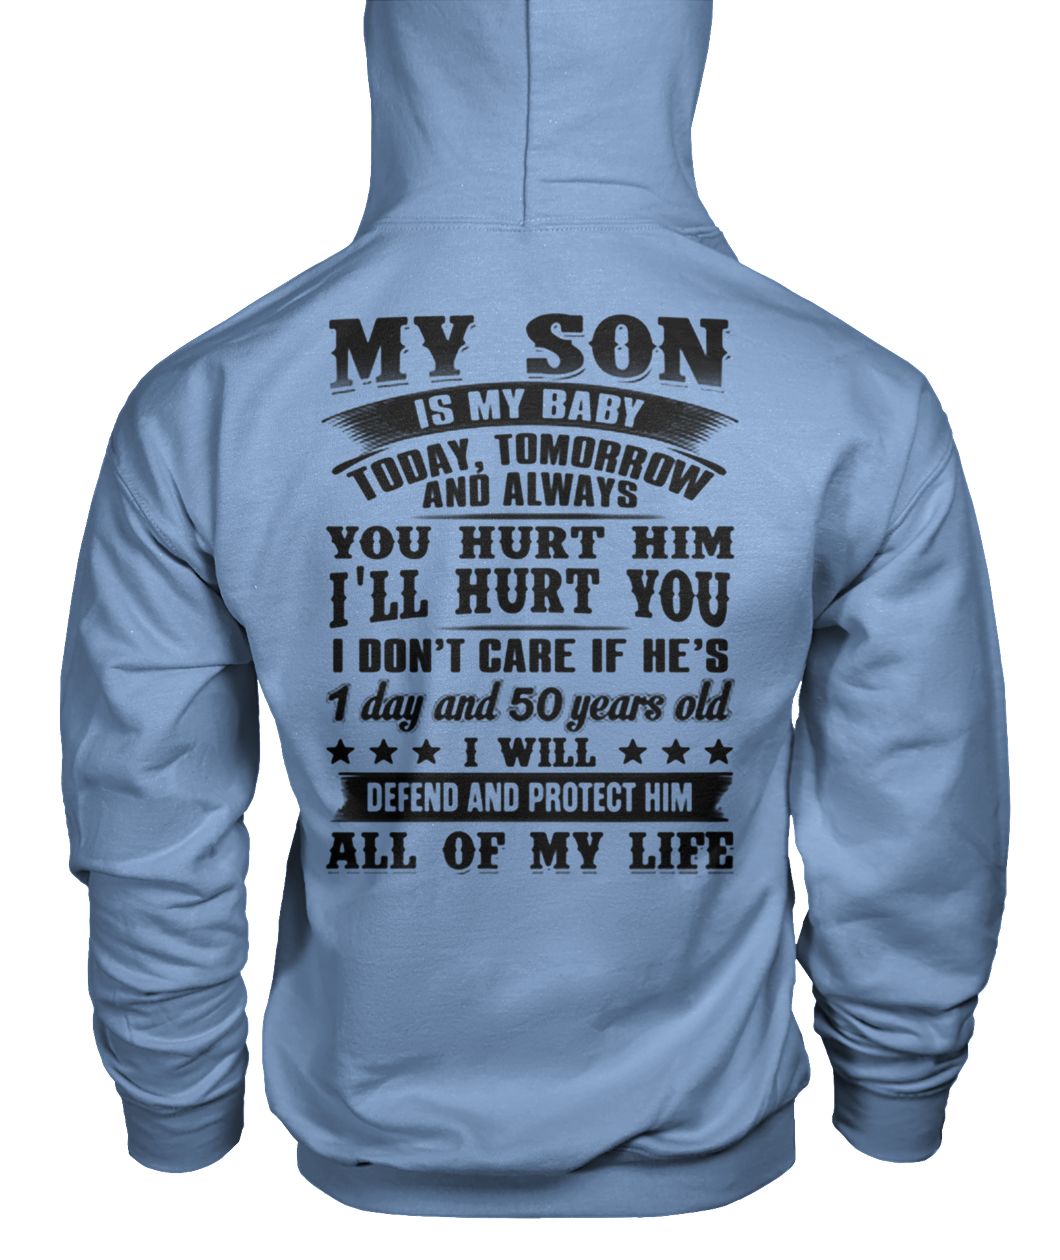 My son is my baby today tomorrow and always you hurt him I'll hurt you gildan hoodie